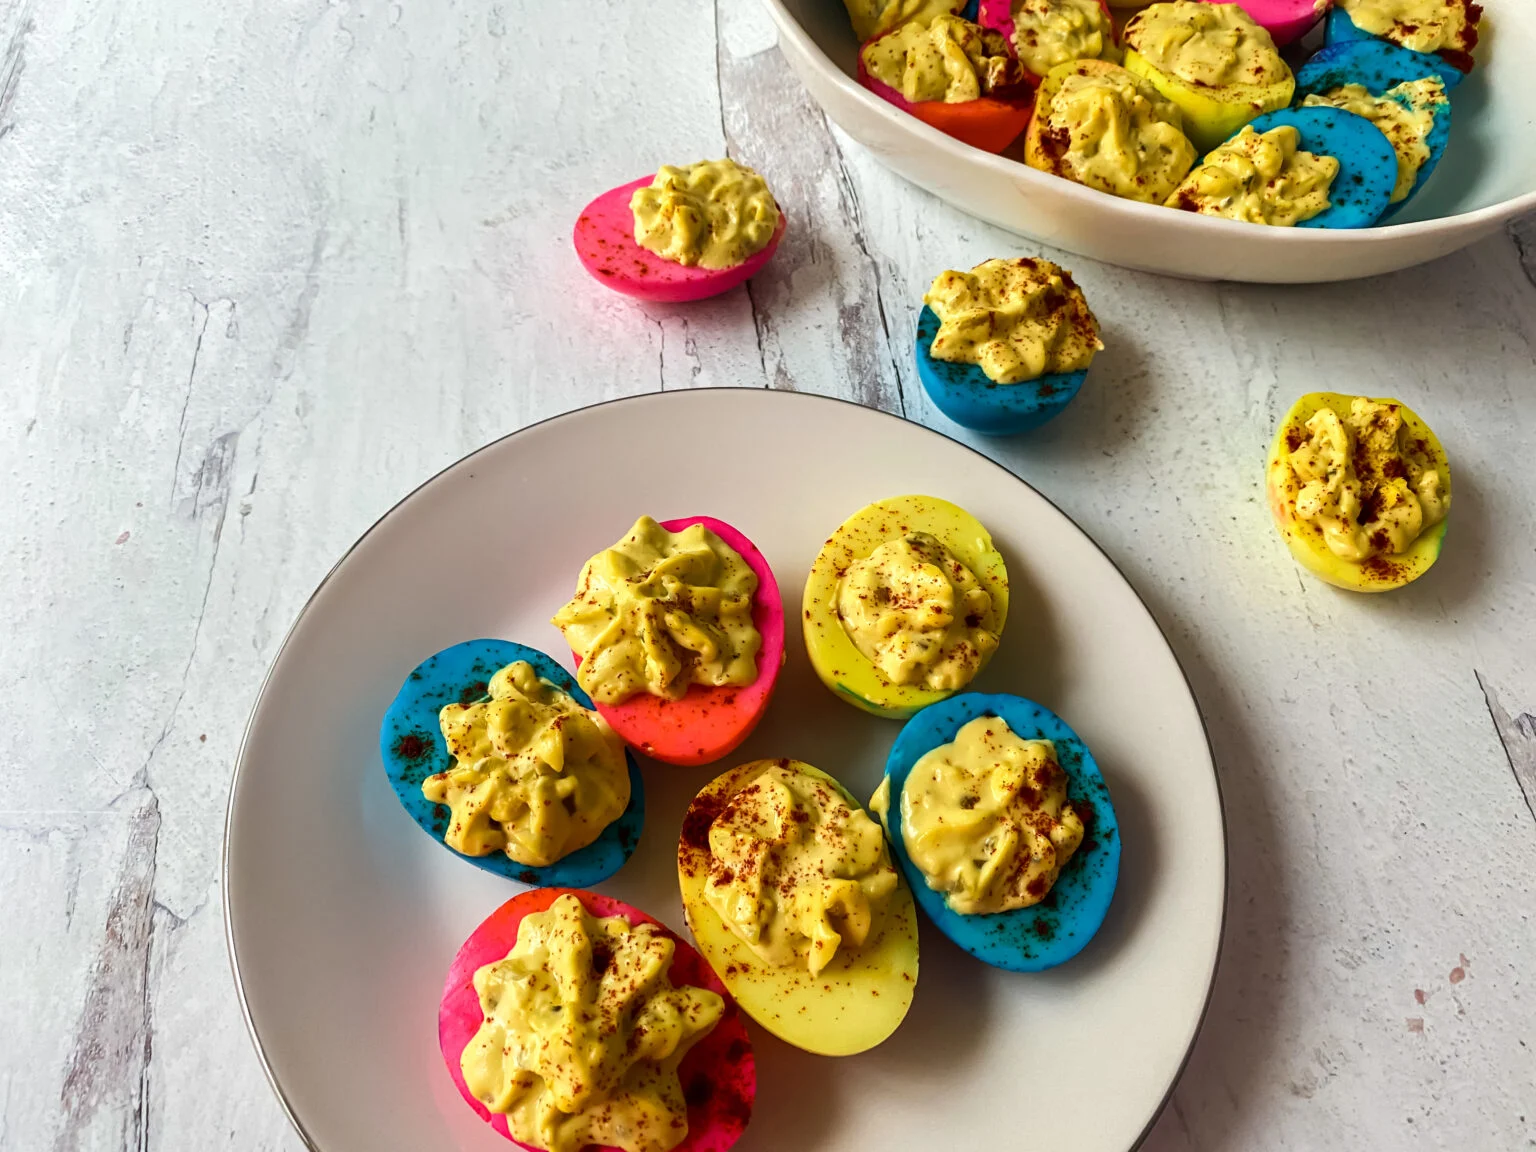 Pink, blue, and yellow colorful deviled eggs